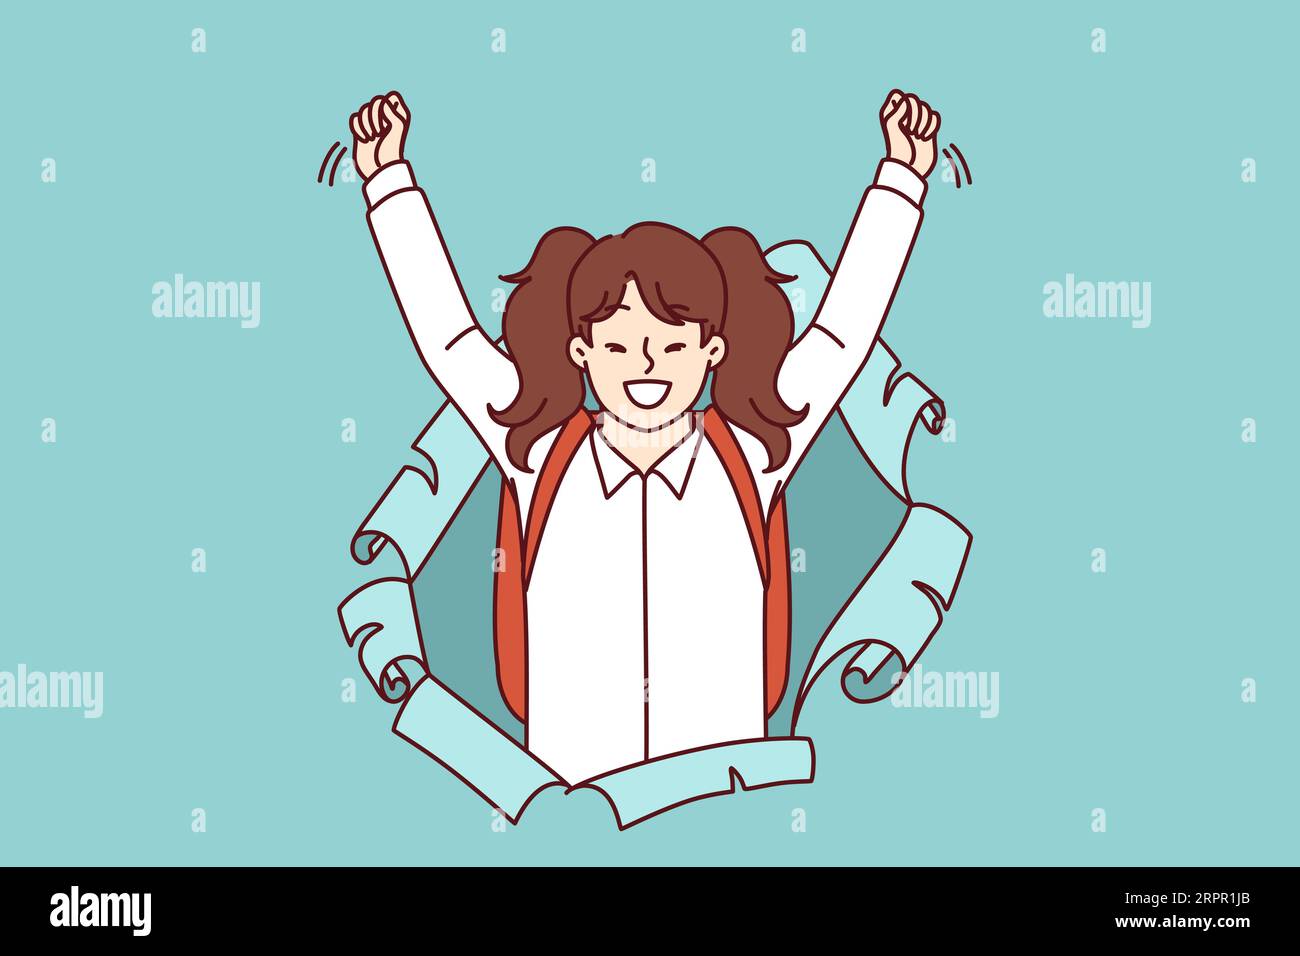 Schoolgirl with backpack joyfully raises hands up and screams loudly peeking out of hole in paper, for concept of back to school. Little girl celebrating beginning of academic year at school Stock Vector